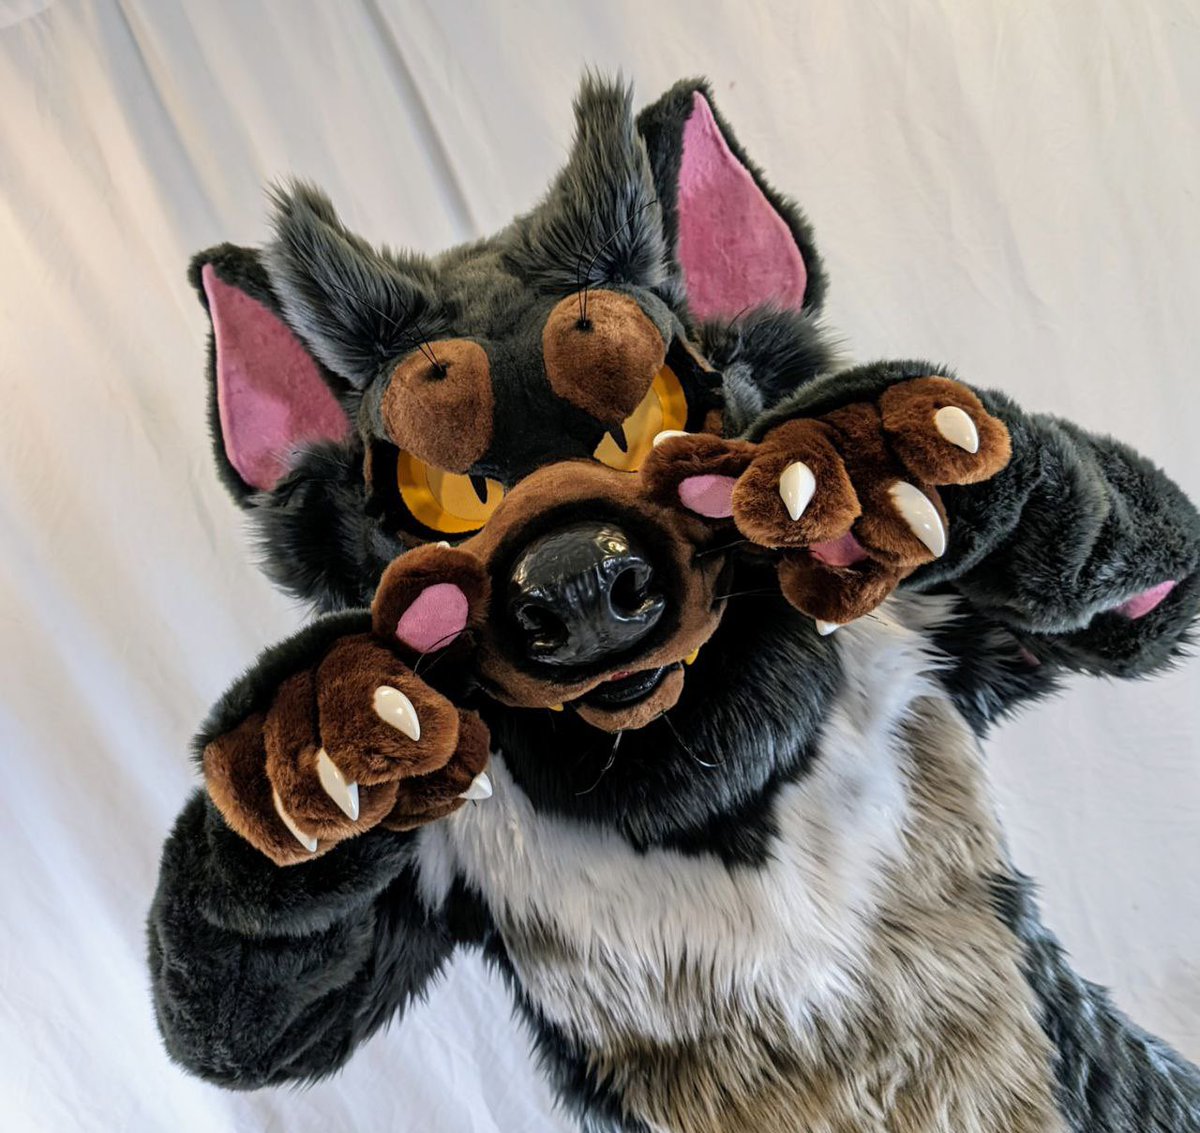 SHE IS FINALLY HERE!! MFL did an AMAZING job on her i could not be happier!! I also will be going to AC this year so come say hi👀 🪡:@MoreFurLess #fursuit #morefurless #furry #fursona #furryfandom #furrycommunity #Tasmaniandevil